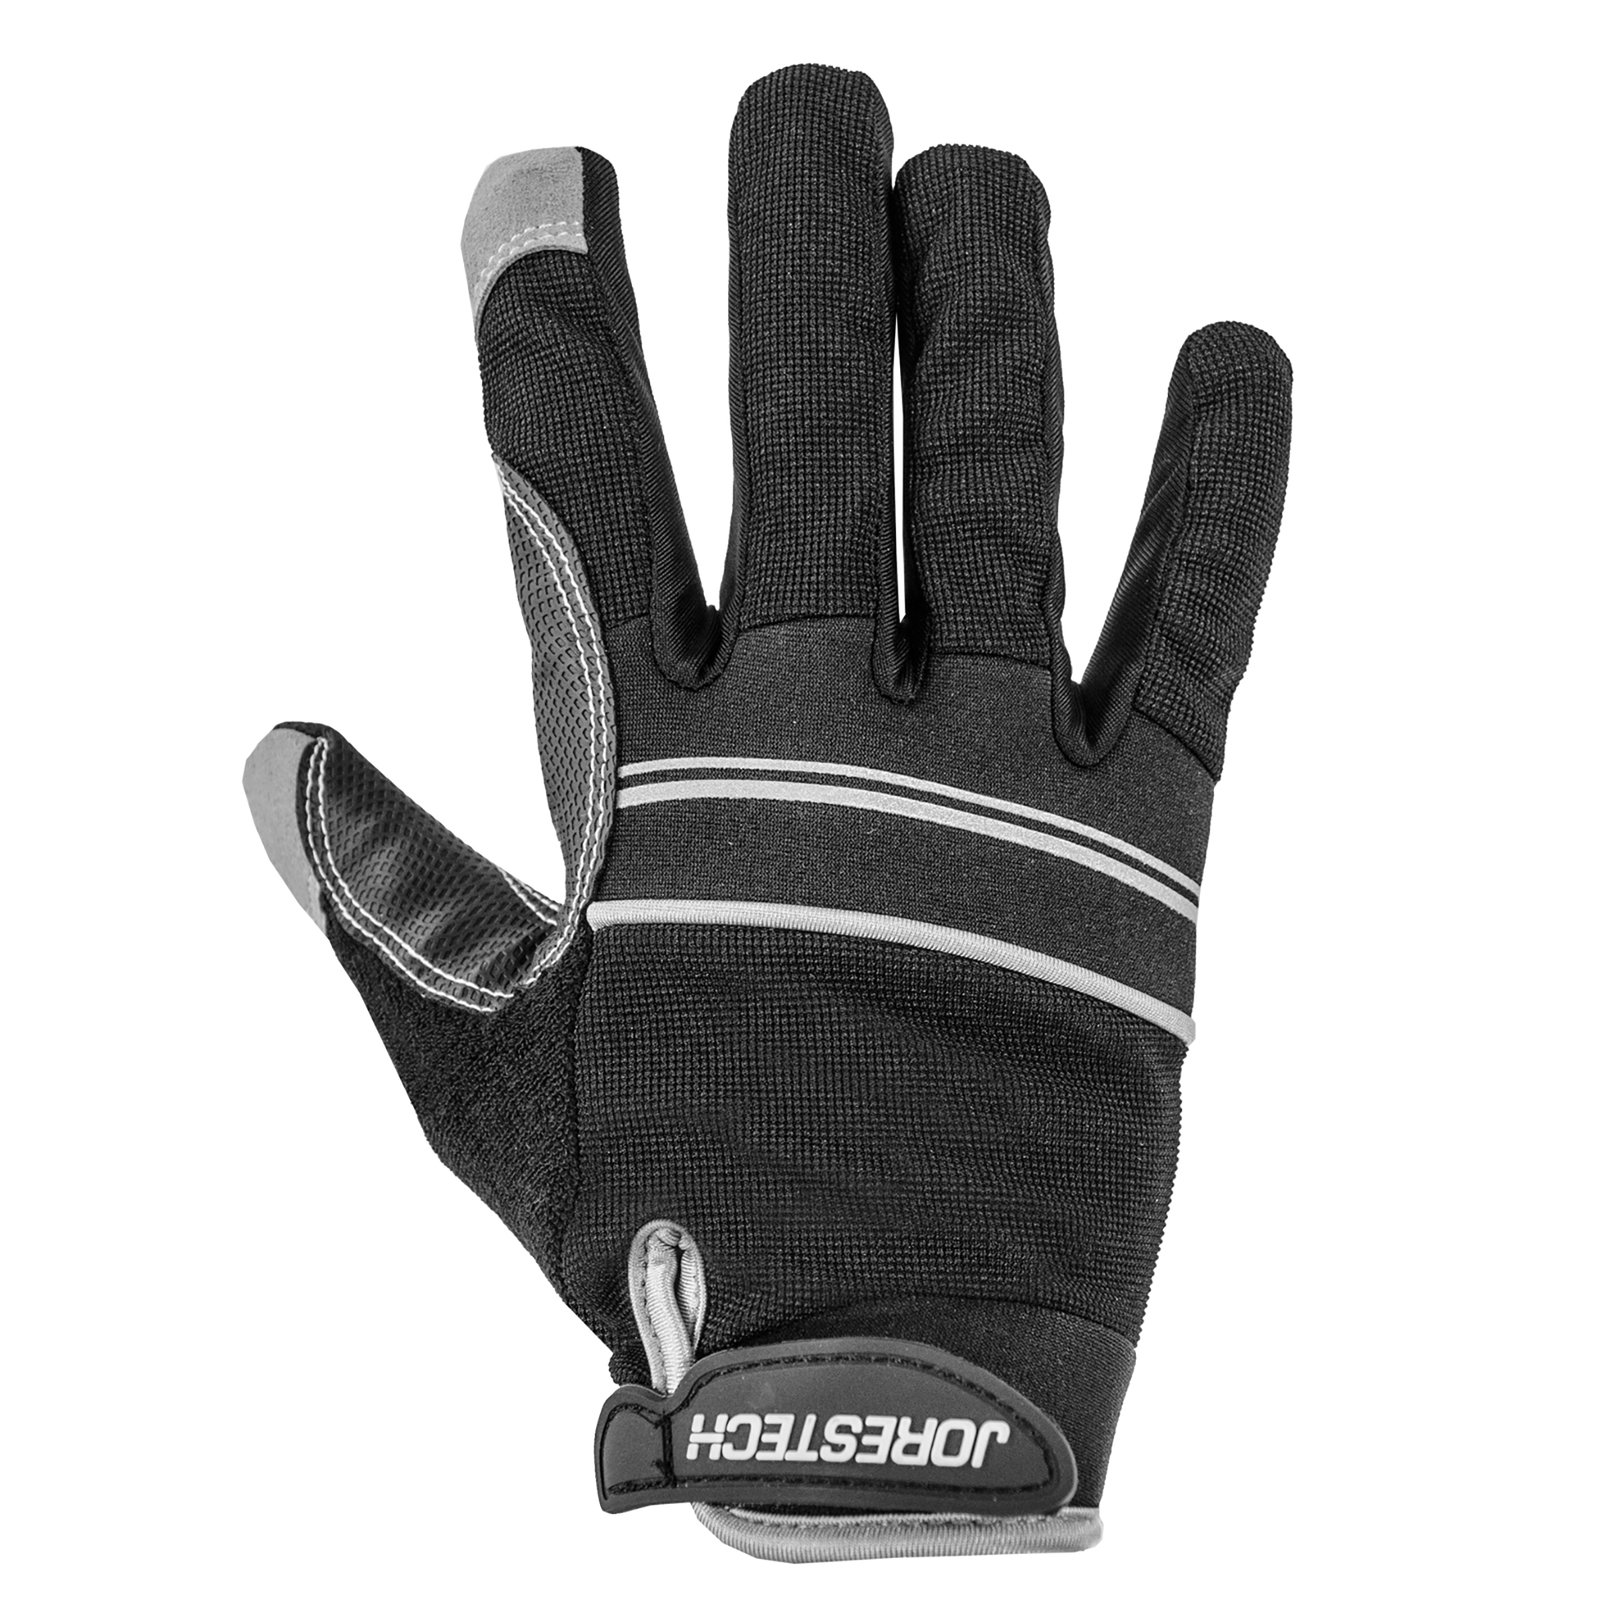 Front view of the black JORESTECH safety work glove with anti slip silicone black dotted palms